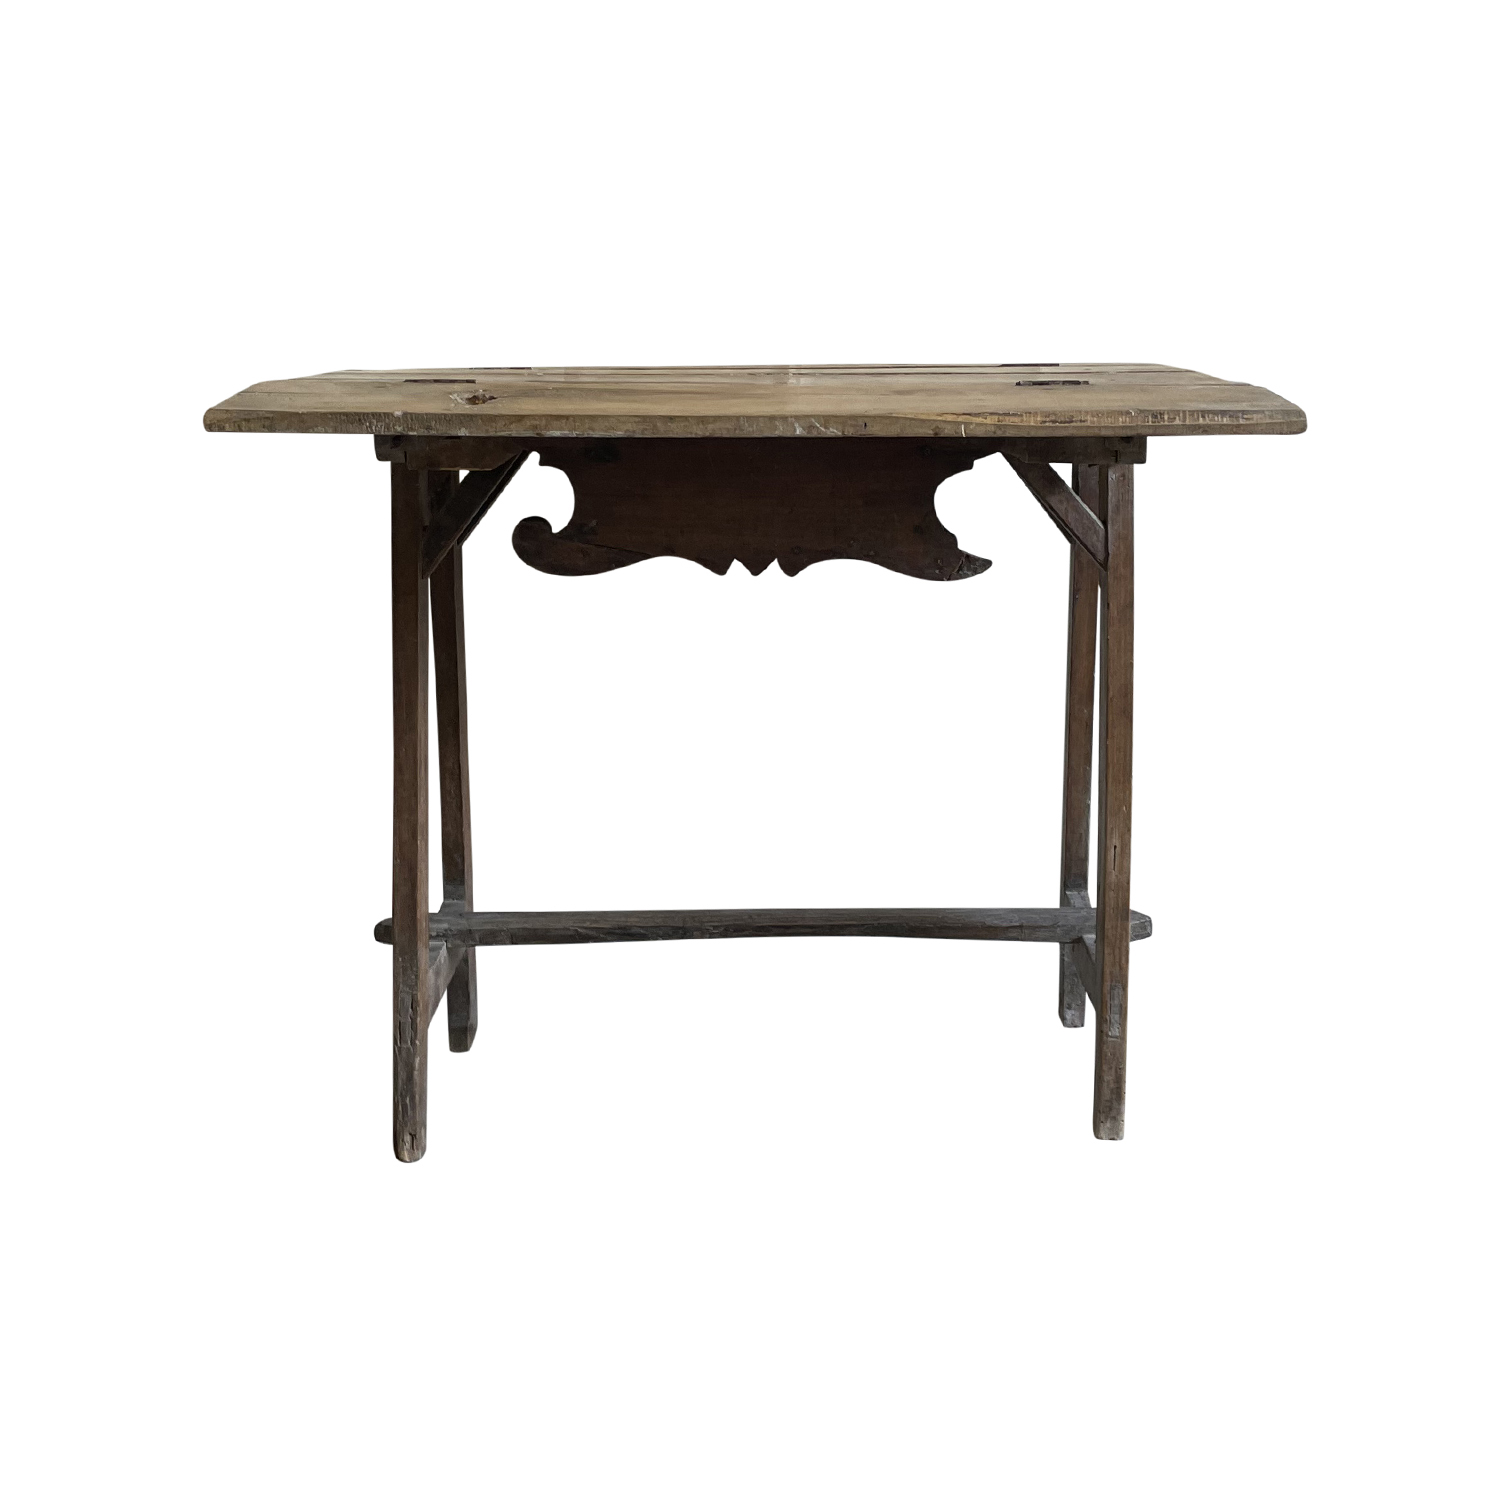 18th Century Small Foldable Tuscan Table